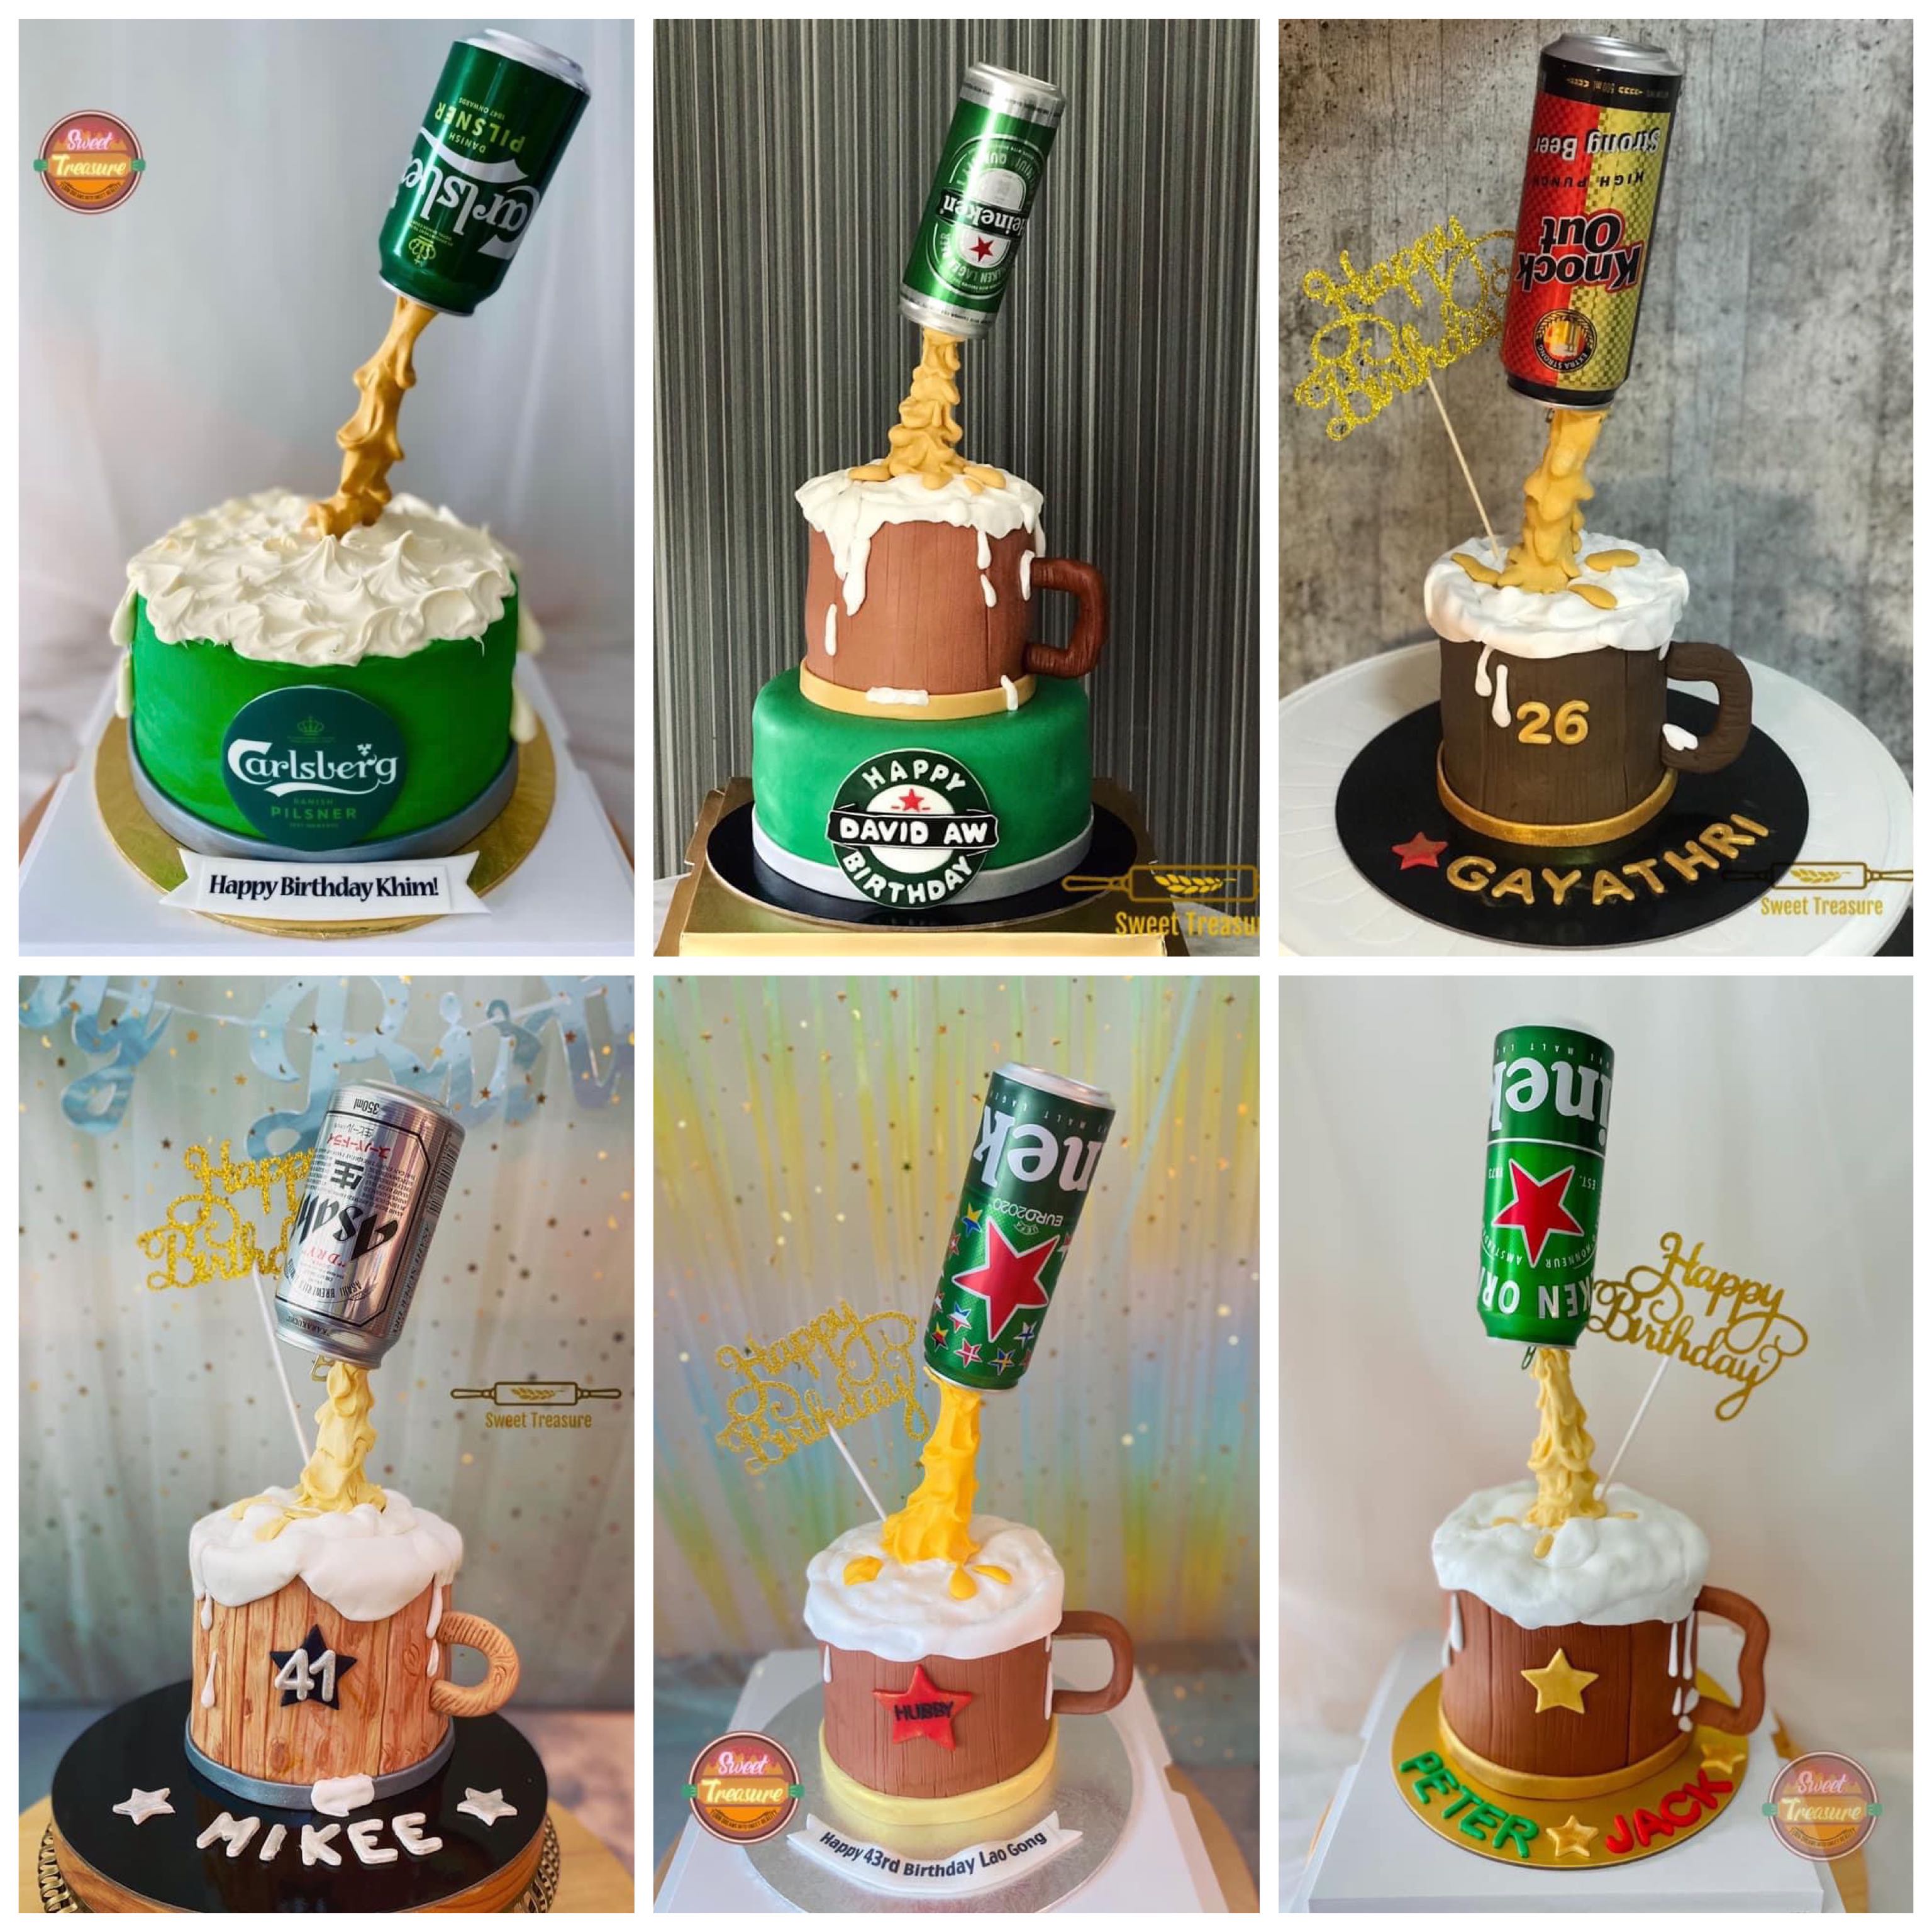 I added the beer can to make it a gravity cake : r/cakedecorating